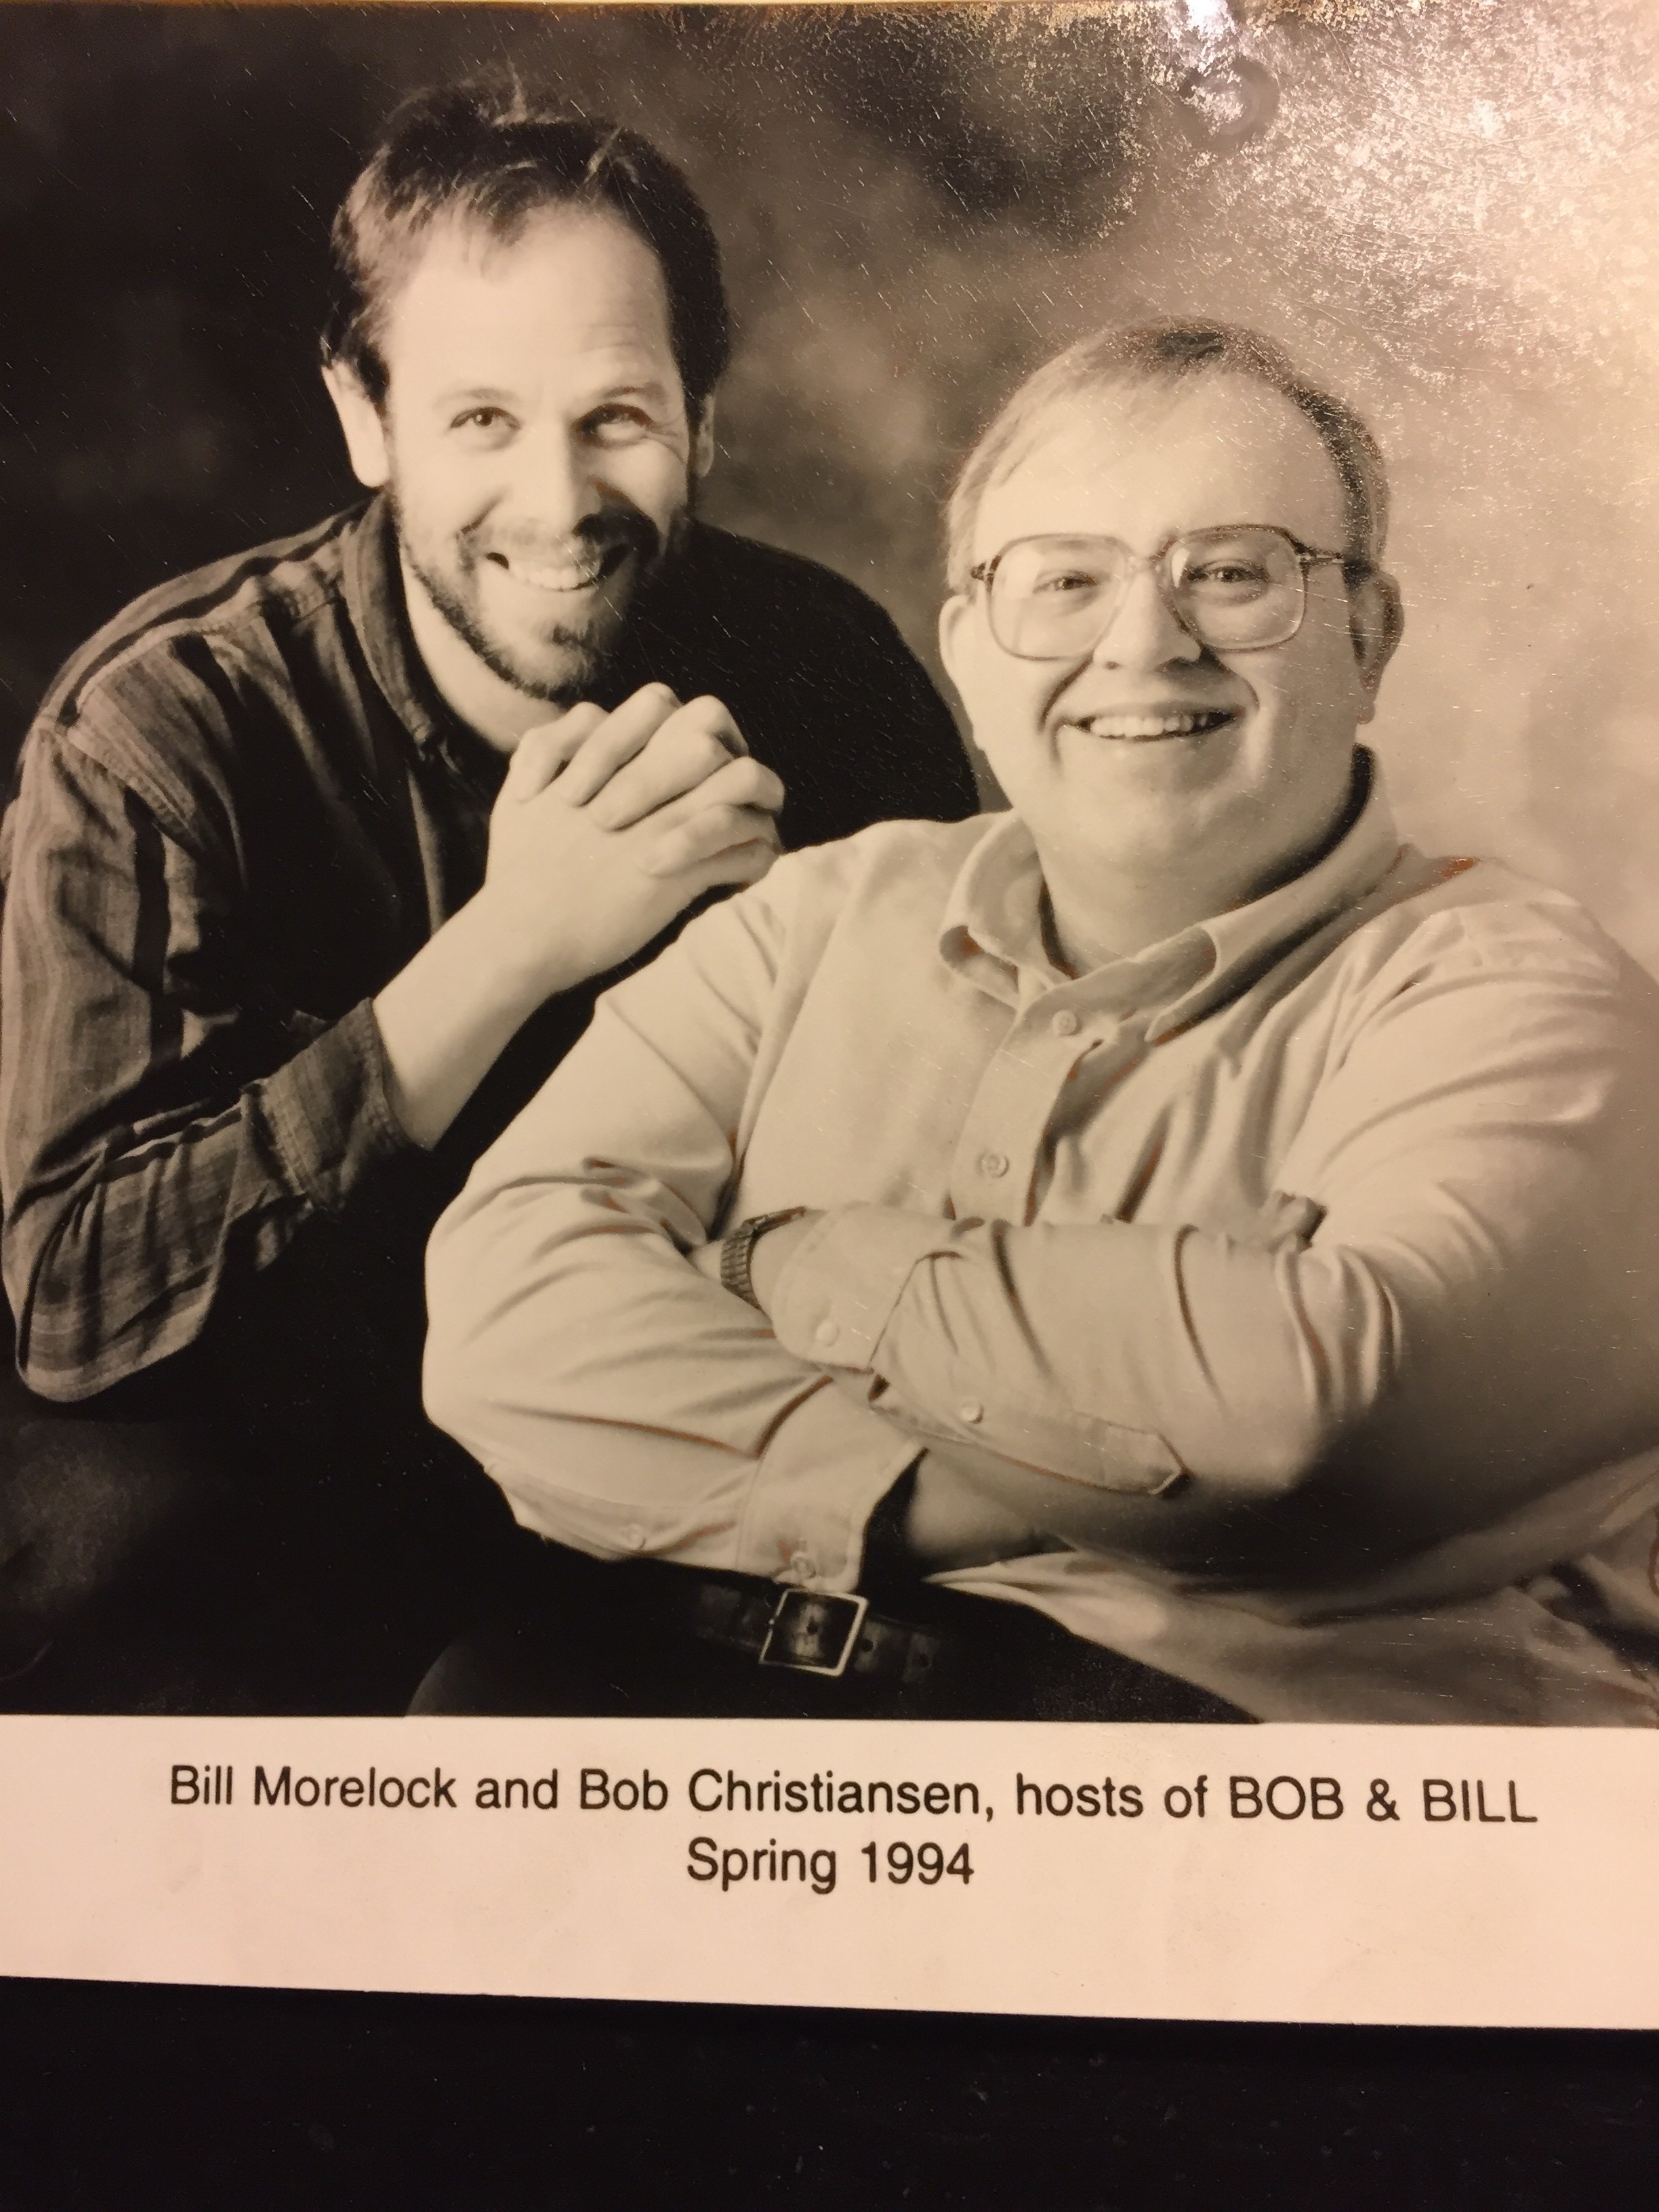 Portrait of Bob and Bill - hosts of classical music.